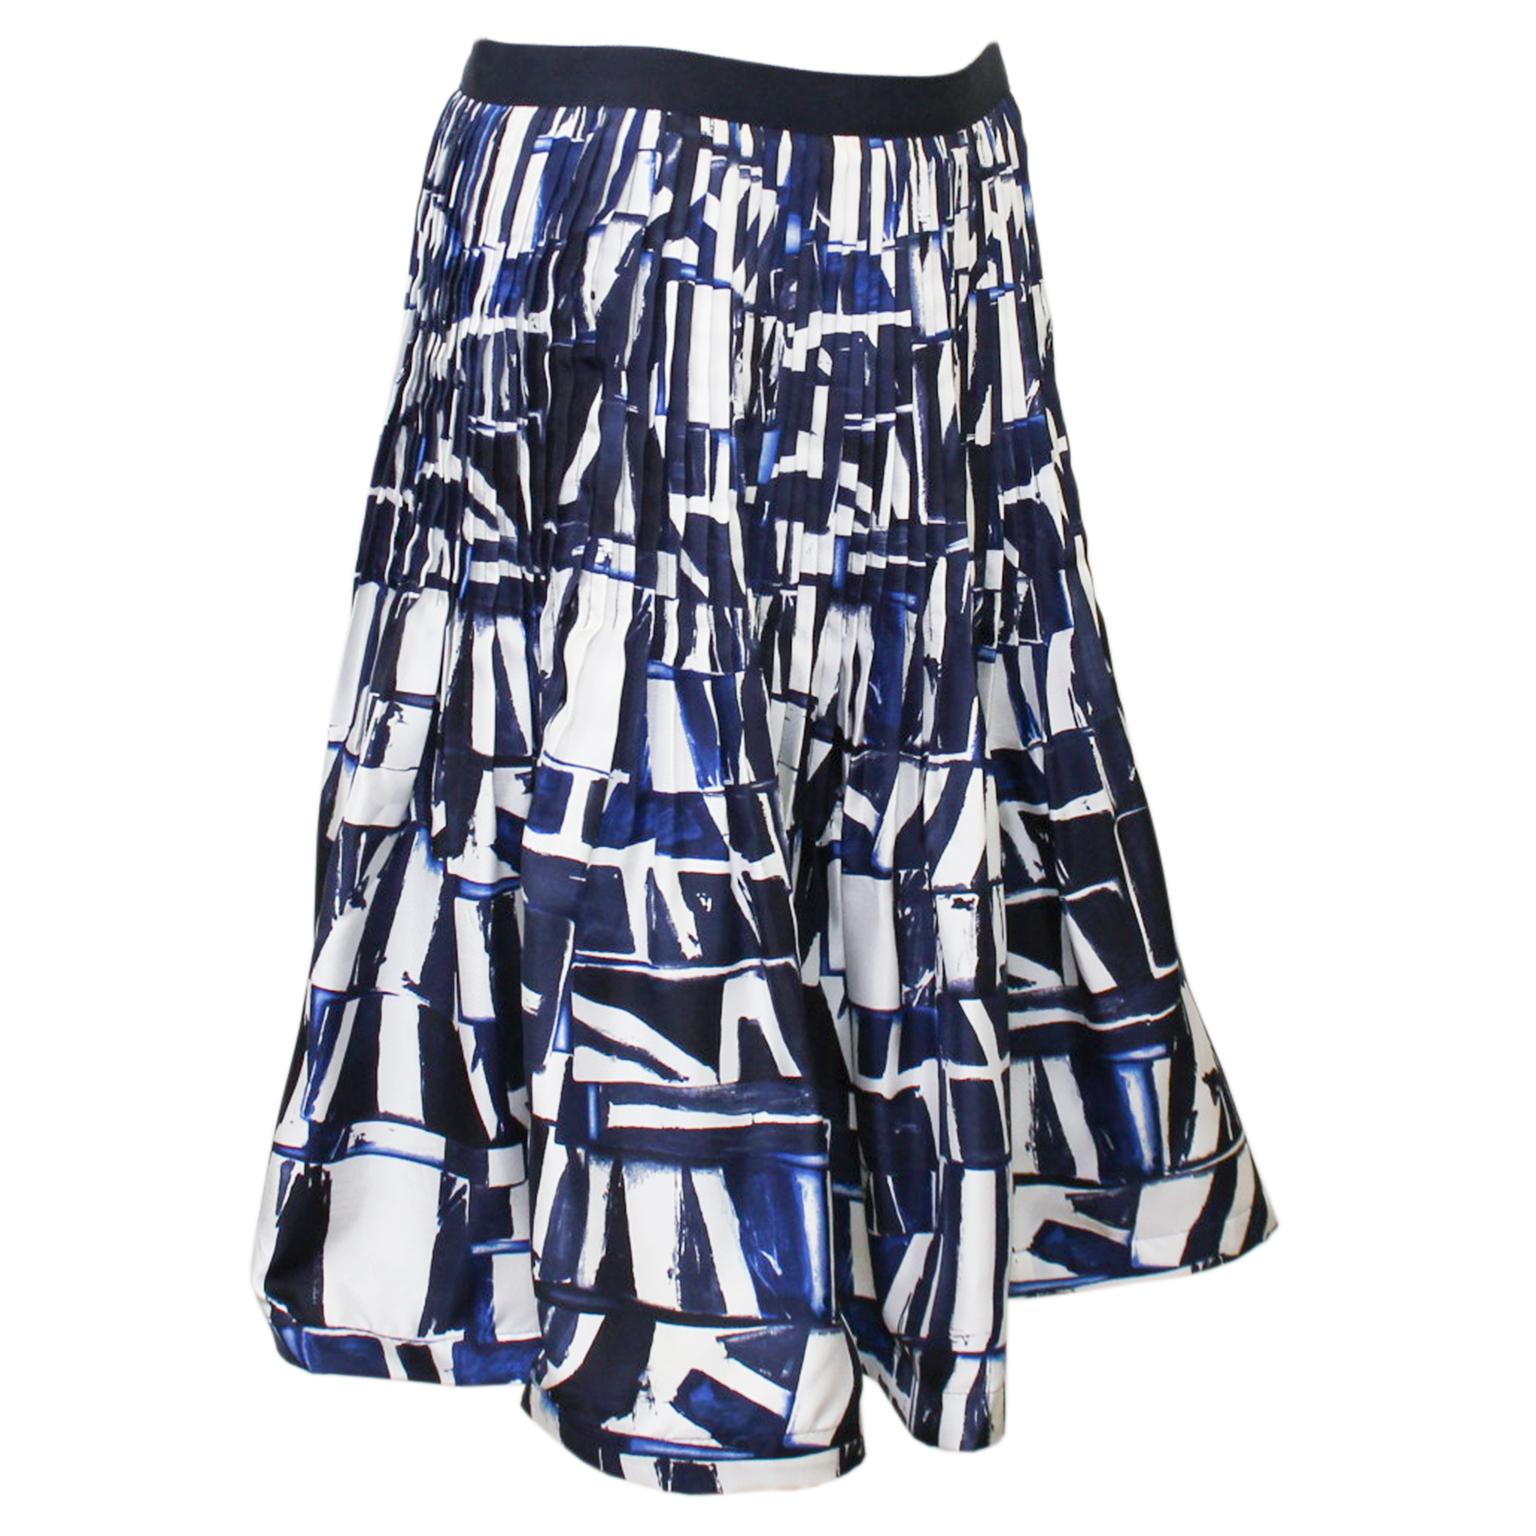 2000s Oscar de la Renta silk skirt with a blue abstract print. The skirt hugs the hips with thin pleats and flounces out around the knees. The shape of the skirt is helped with a horsehair lined hem. In excellent condition, fits like a US 6. Skirt